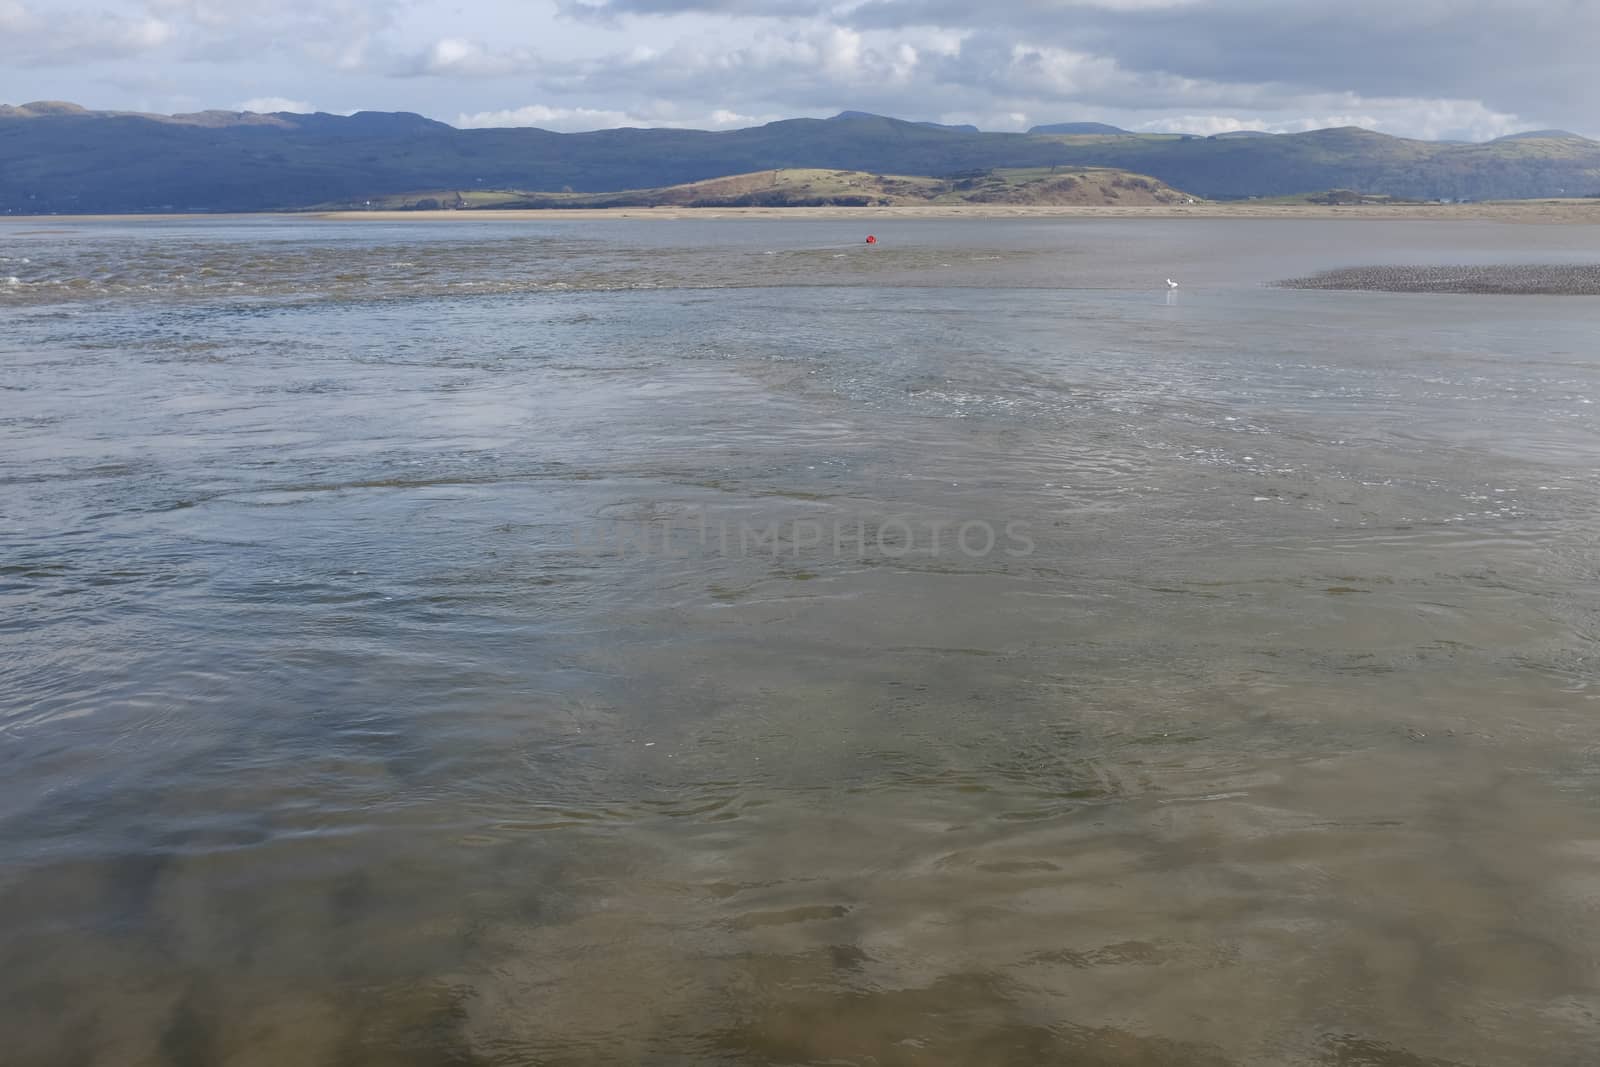 A stretch of water, a tidal estuary, with a choppy outer current and a near water under current displacing sand from the bed to the upper surface.